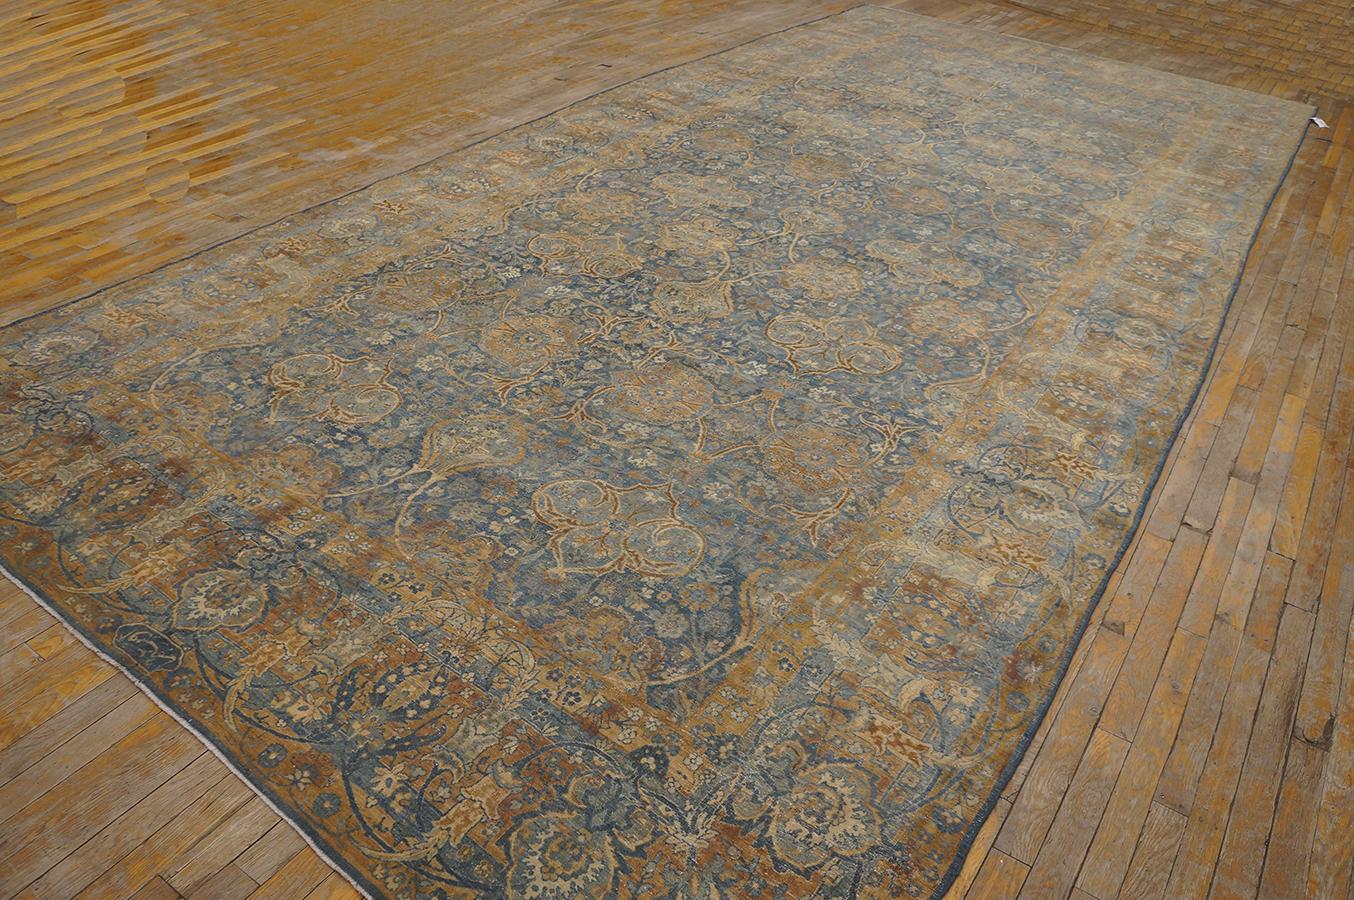 Early 20th Century 1920s Persian Kerman Carpet Produced By OCM ( 8' x 17'6